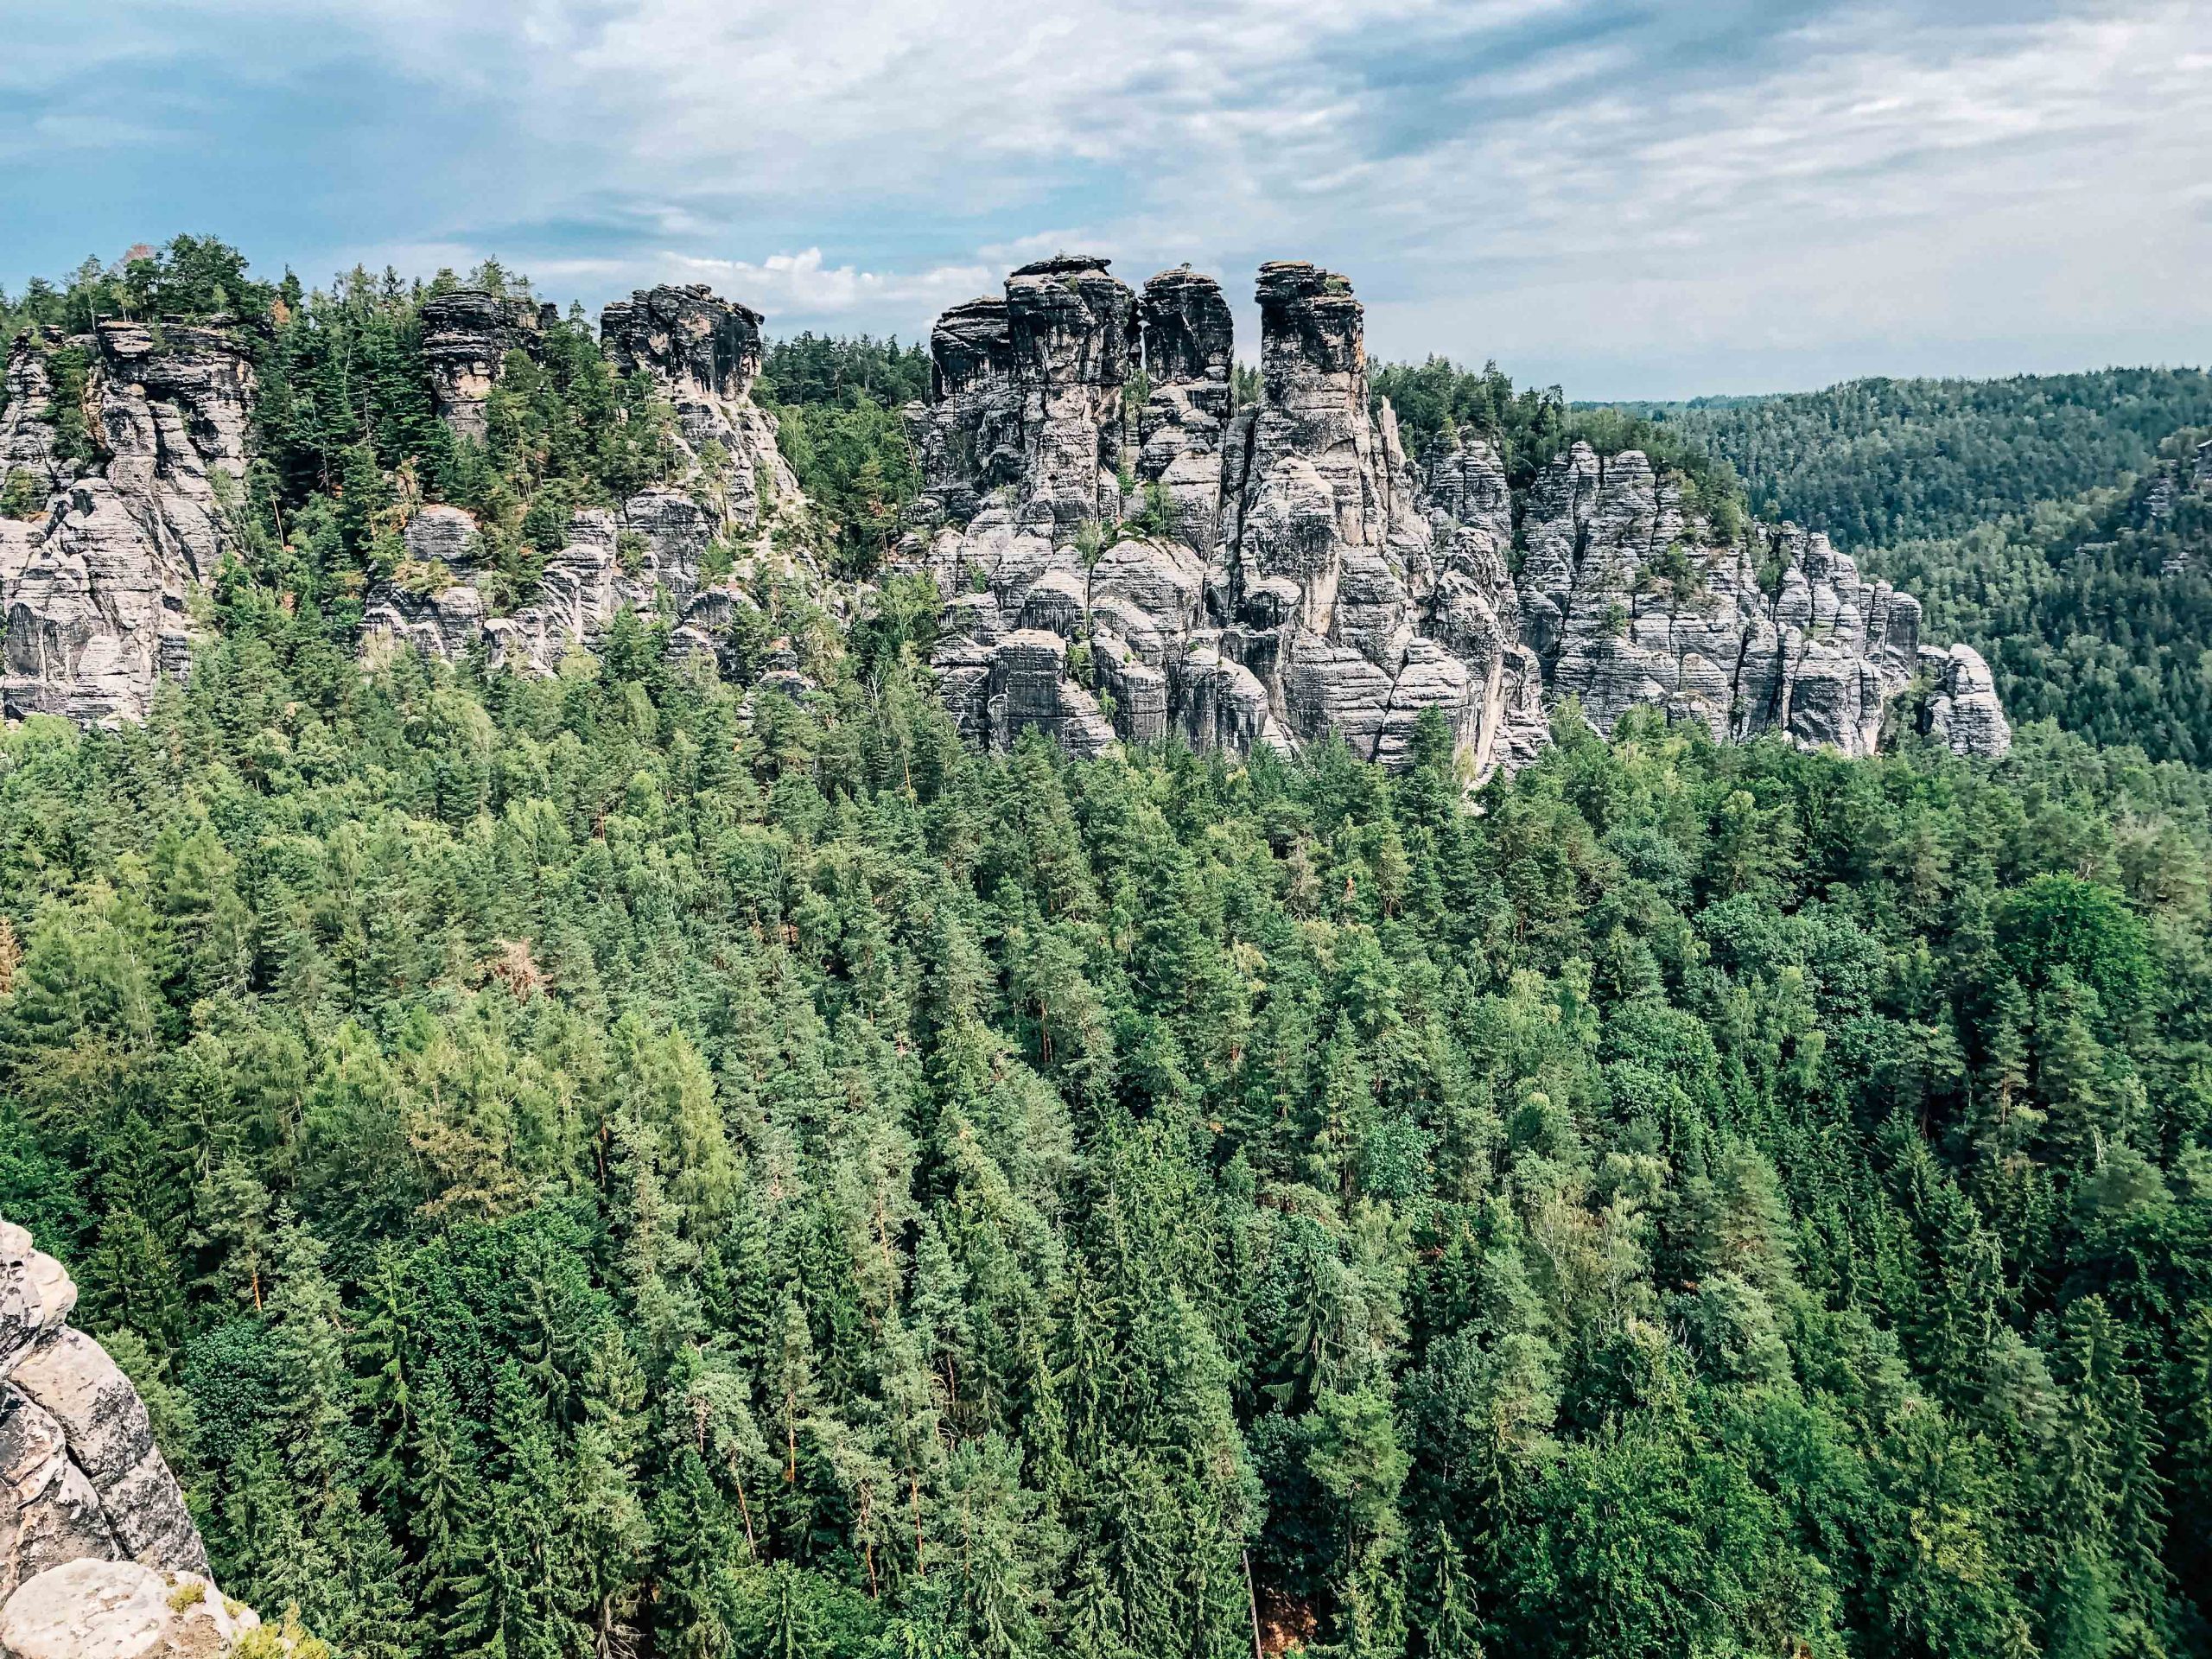 Summer is a wonderful time to visit Bastei